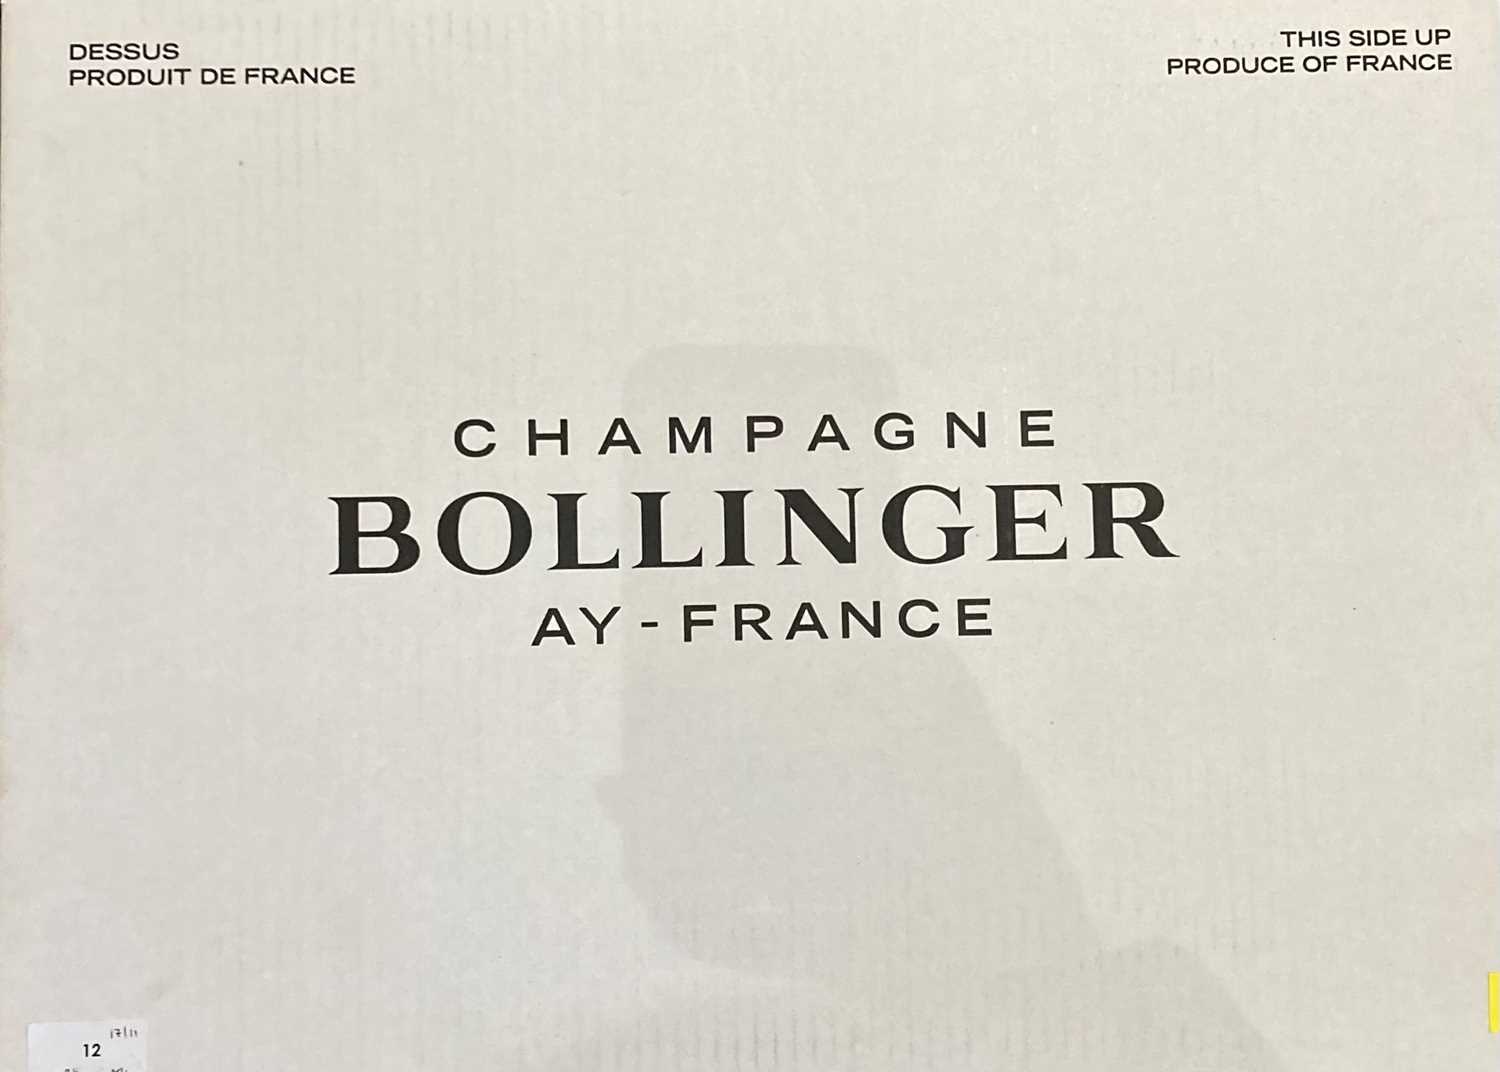 4 Bottles Champagne Bollinger The Exclusive "James Bond 007’ Limited Edition" - Image 8 of 8